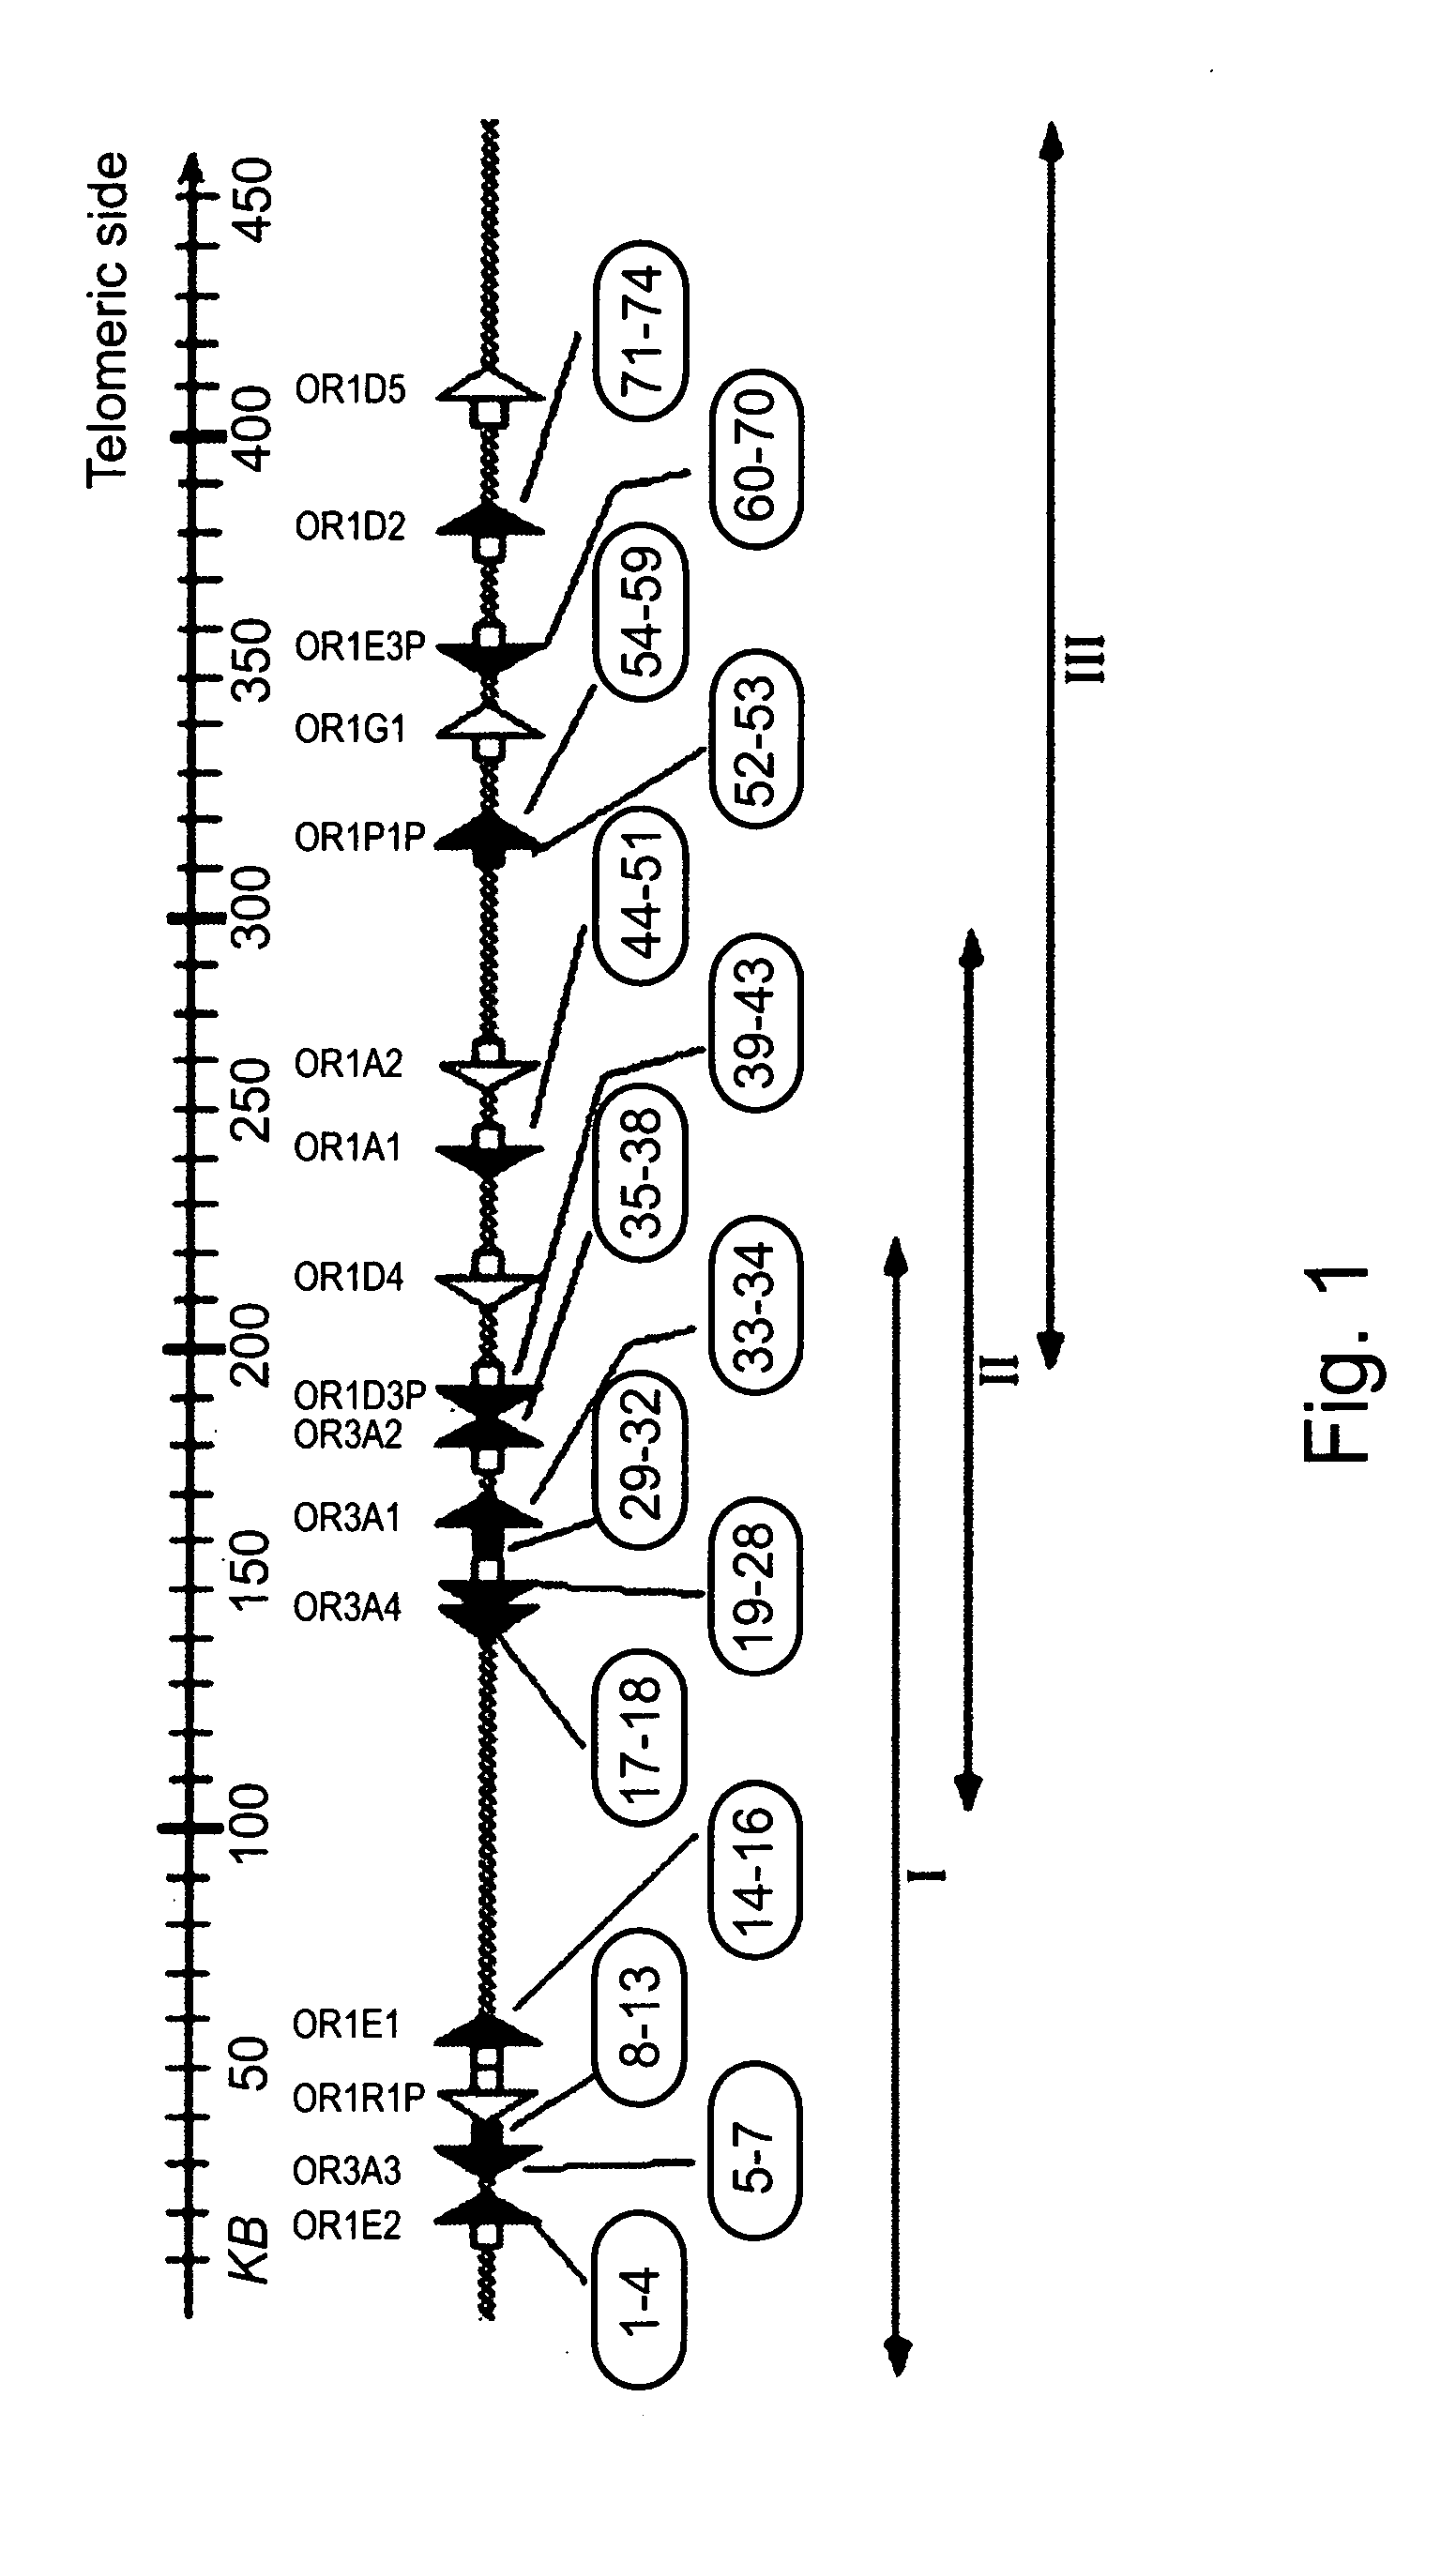 Polymorphic olfactory receptor genes and arrays, kits and methods utilizing information derived therefrom for genetic typing of individuals